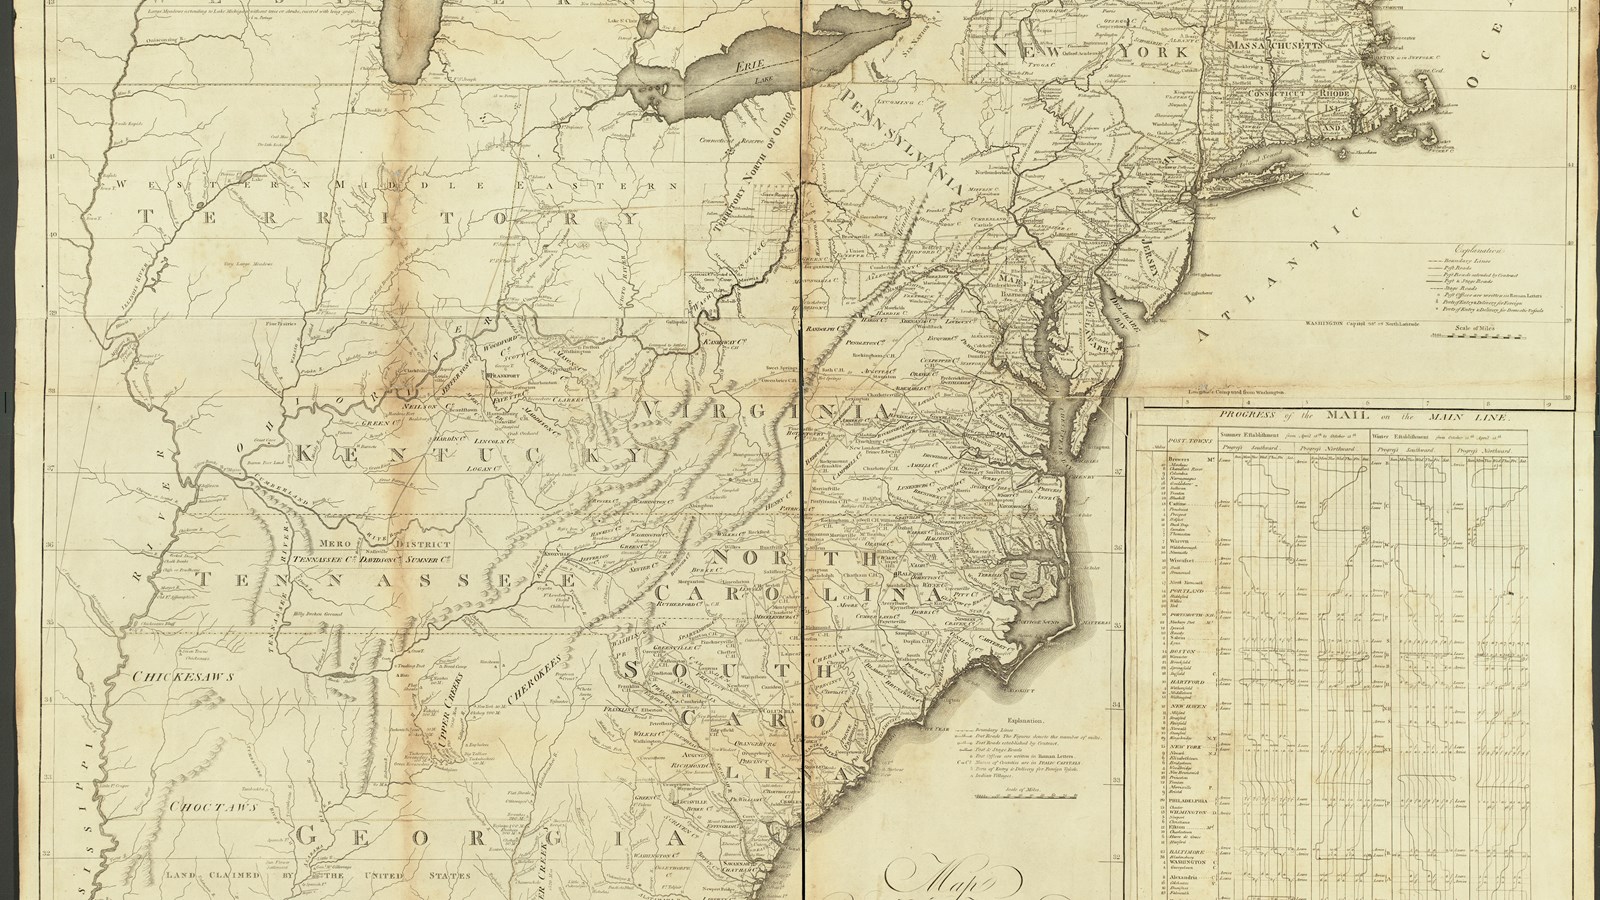 Historic black-and-white map showing creeks, roads, settlements, and town names. 